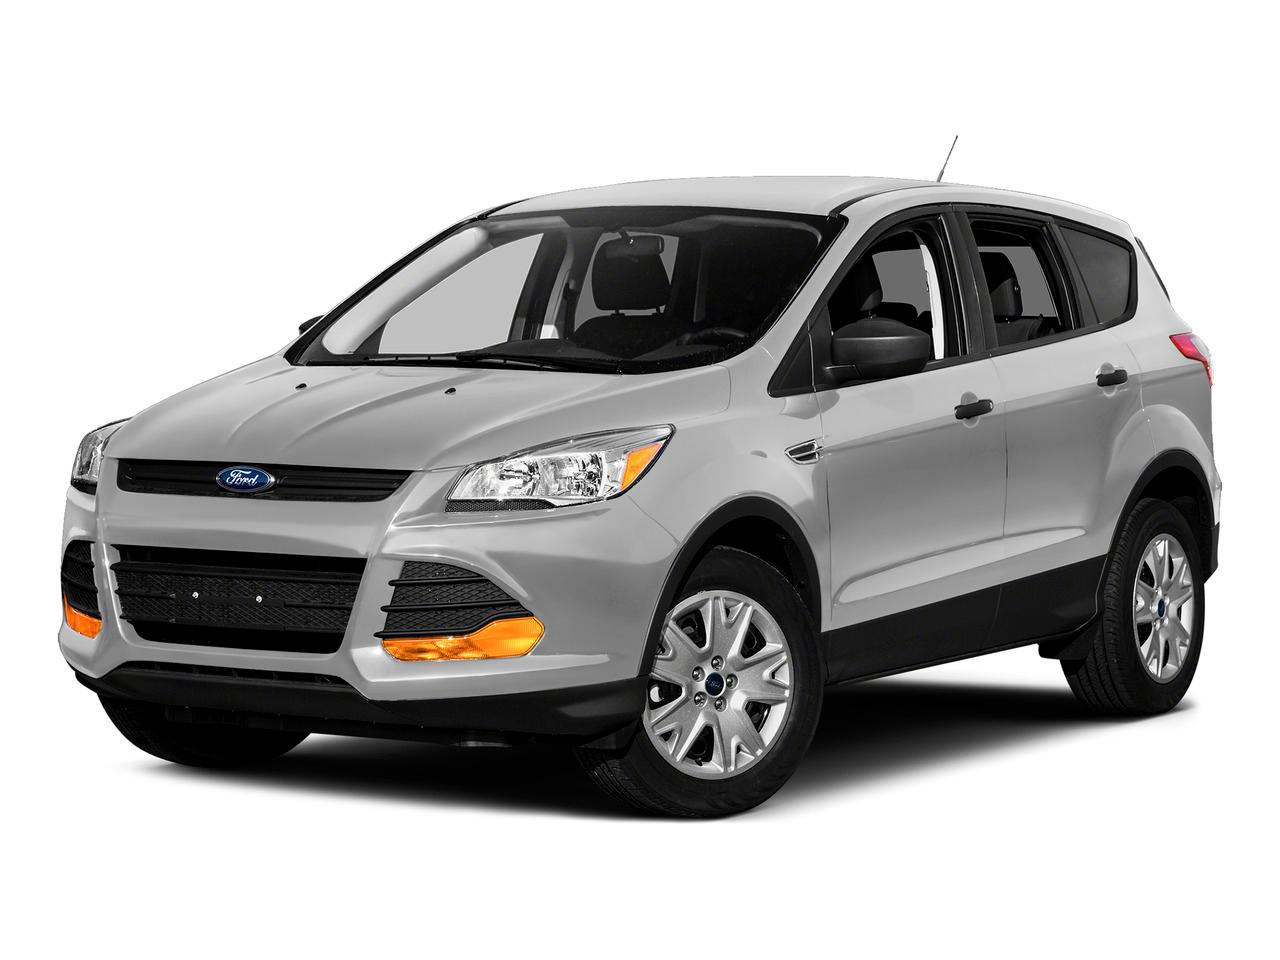 2015 Ford Escape Vehicle Photo in Plainfield, IL 60586